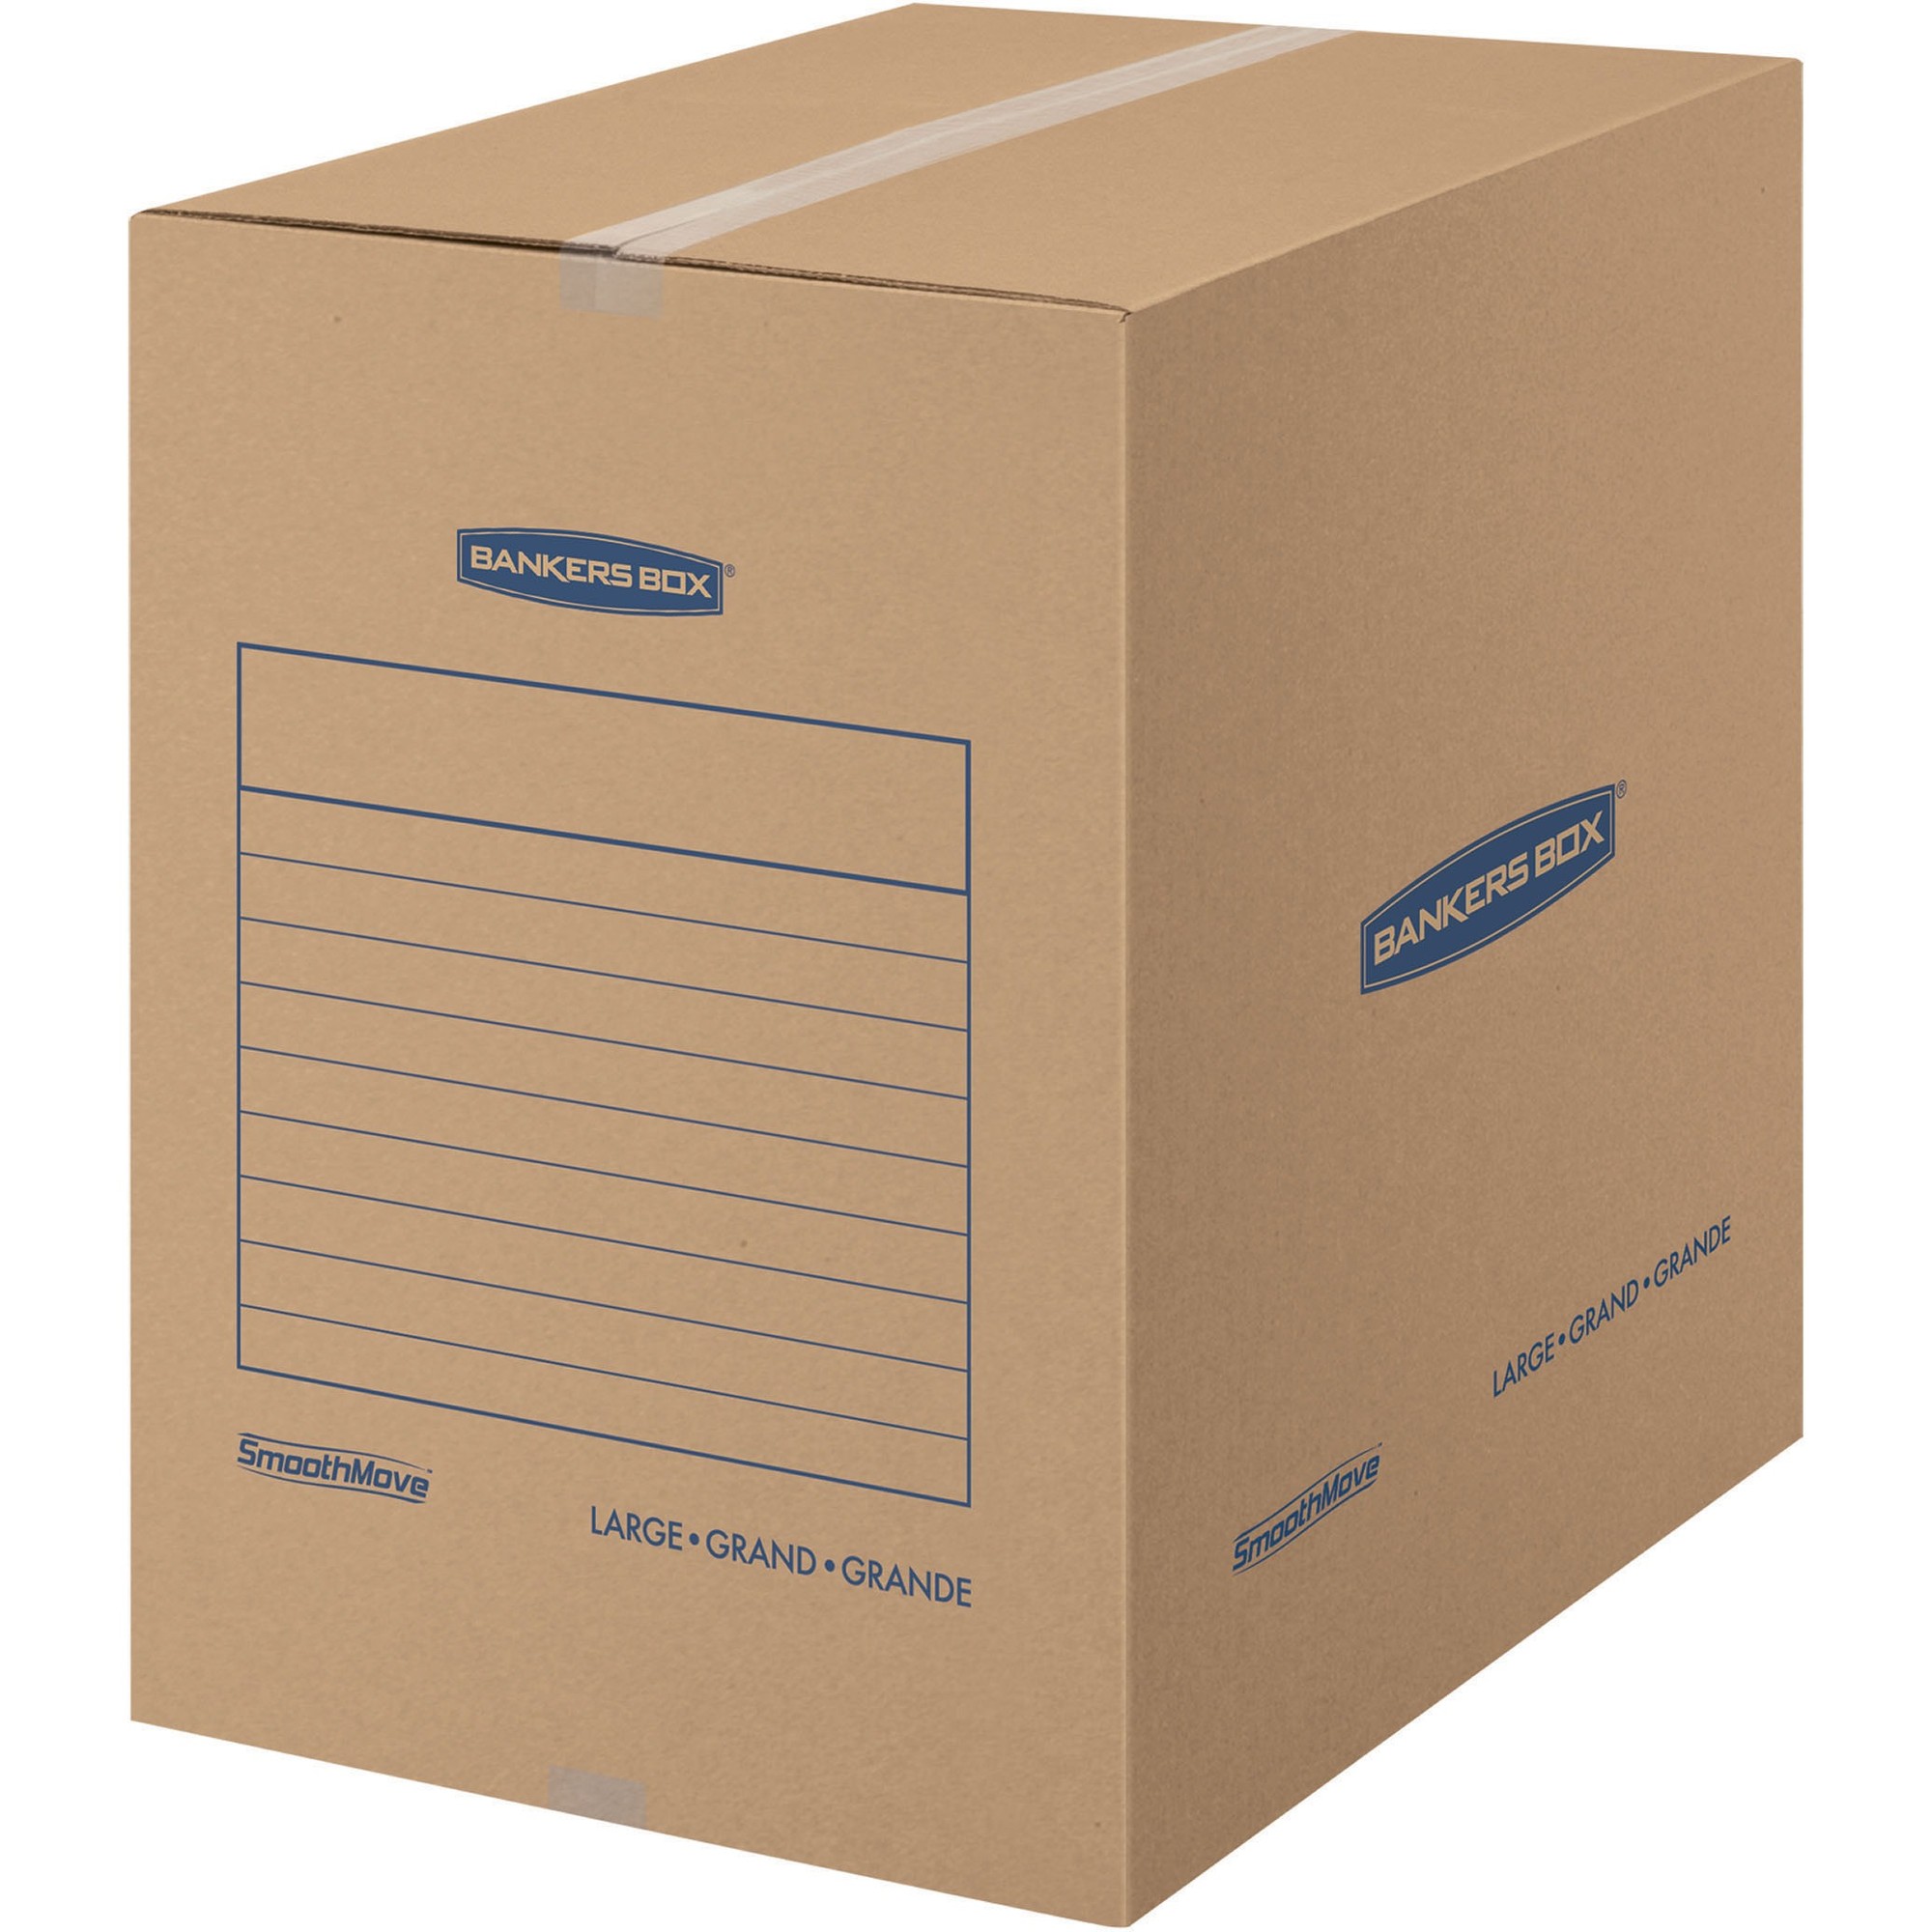 Fellowes SmoothMove Basic Large Moving Boxes - Internal Dimensions: 18" Width x 18" Depth x 24" Height - External Dimensions: 18